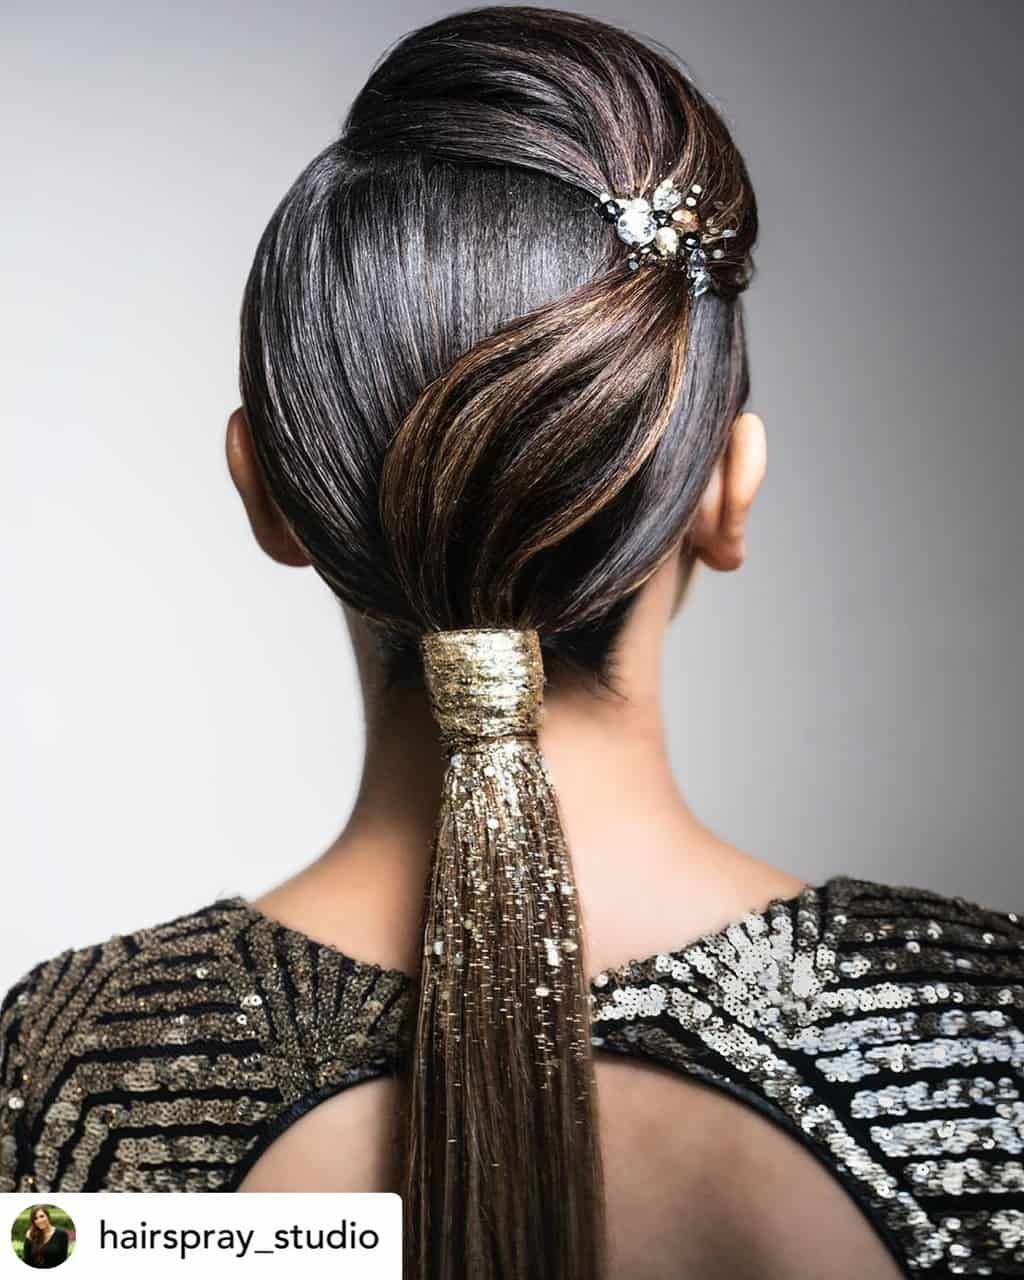 15 Incredibly Cute New Year's Eve Hairstyles 2019 (Tutorials Included) - 15 Incredibly Cute New Year's Eve Hairstyles 2019 (Tutorials Included) -   19 style Hair tutorial ideas